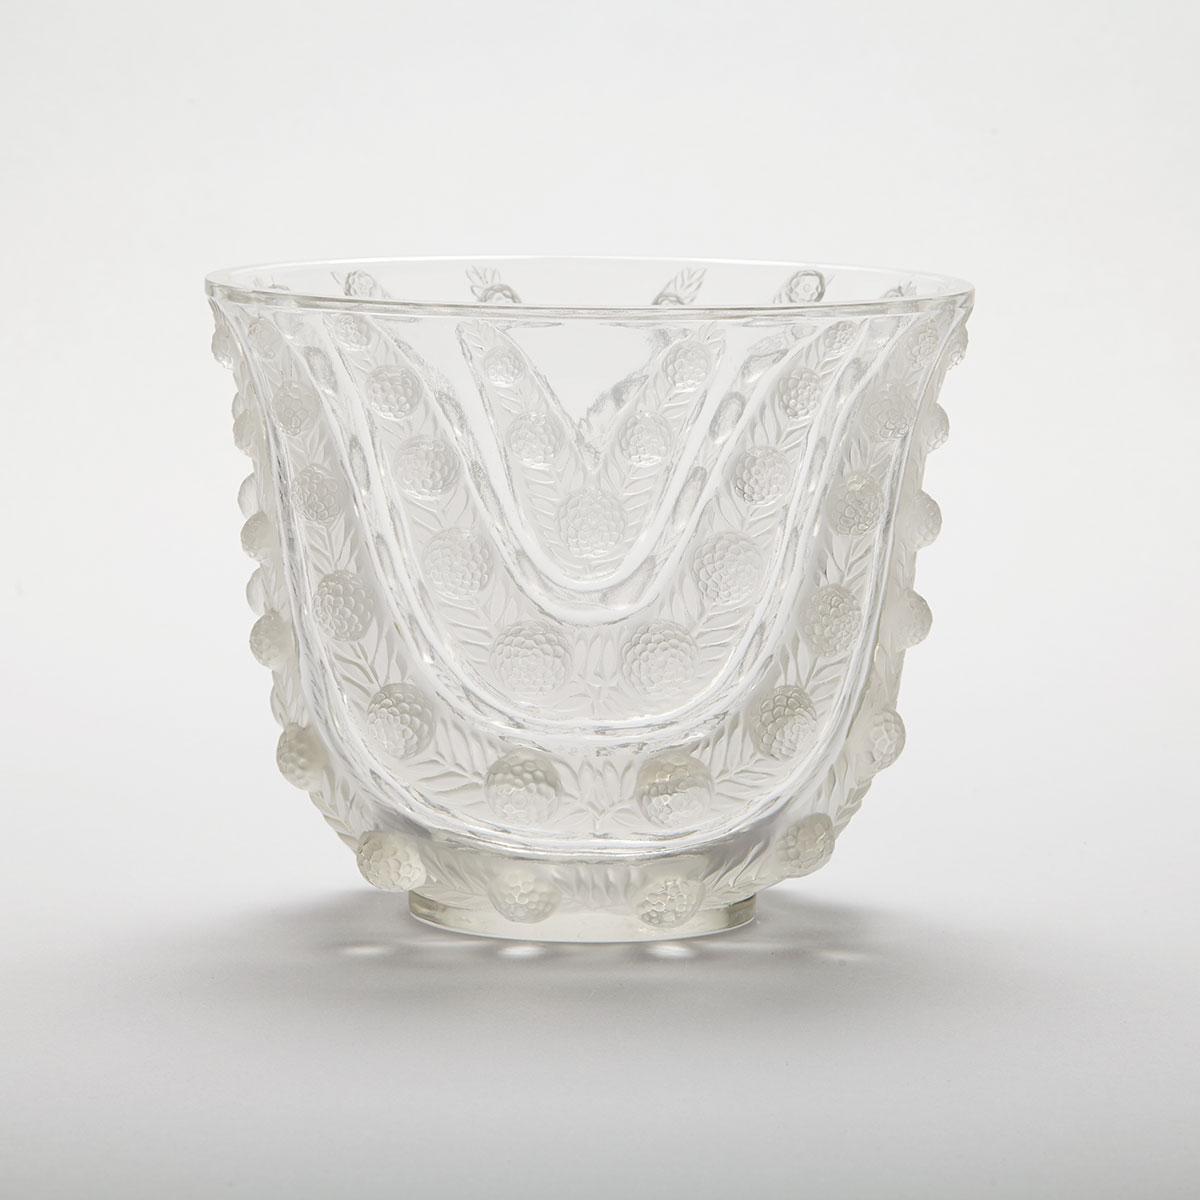 ‘Vichy’, Lalique Moulded and Partly Frosted Glass Vase, post-1945